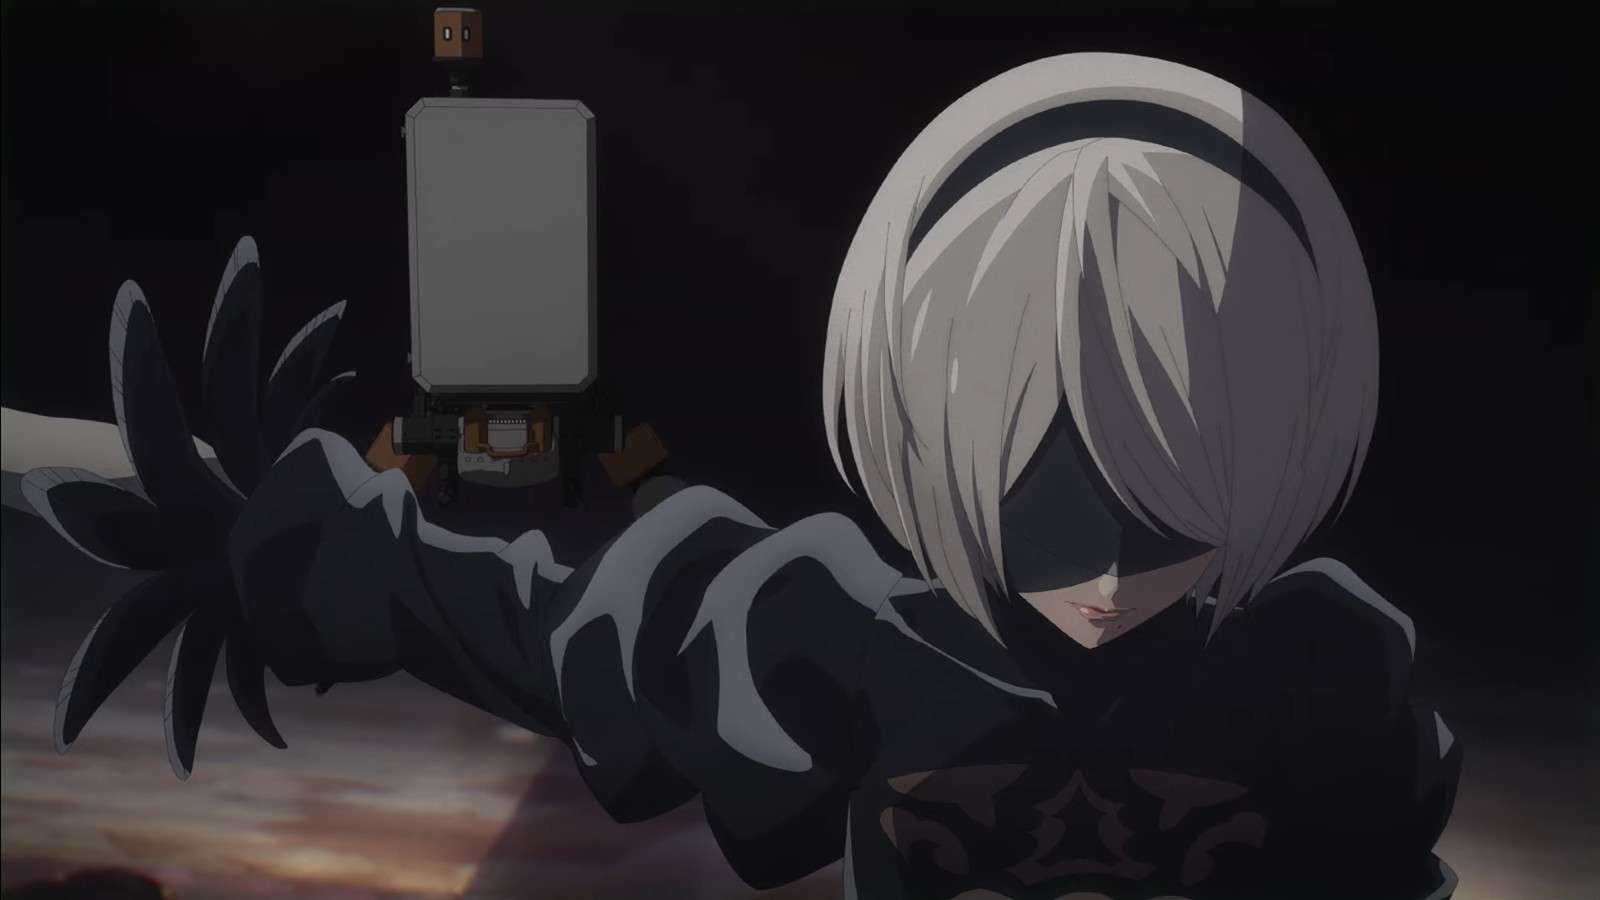 An image of android 2B from the Neir Automata Ver 1.1a anime